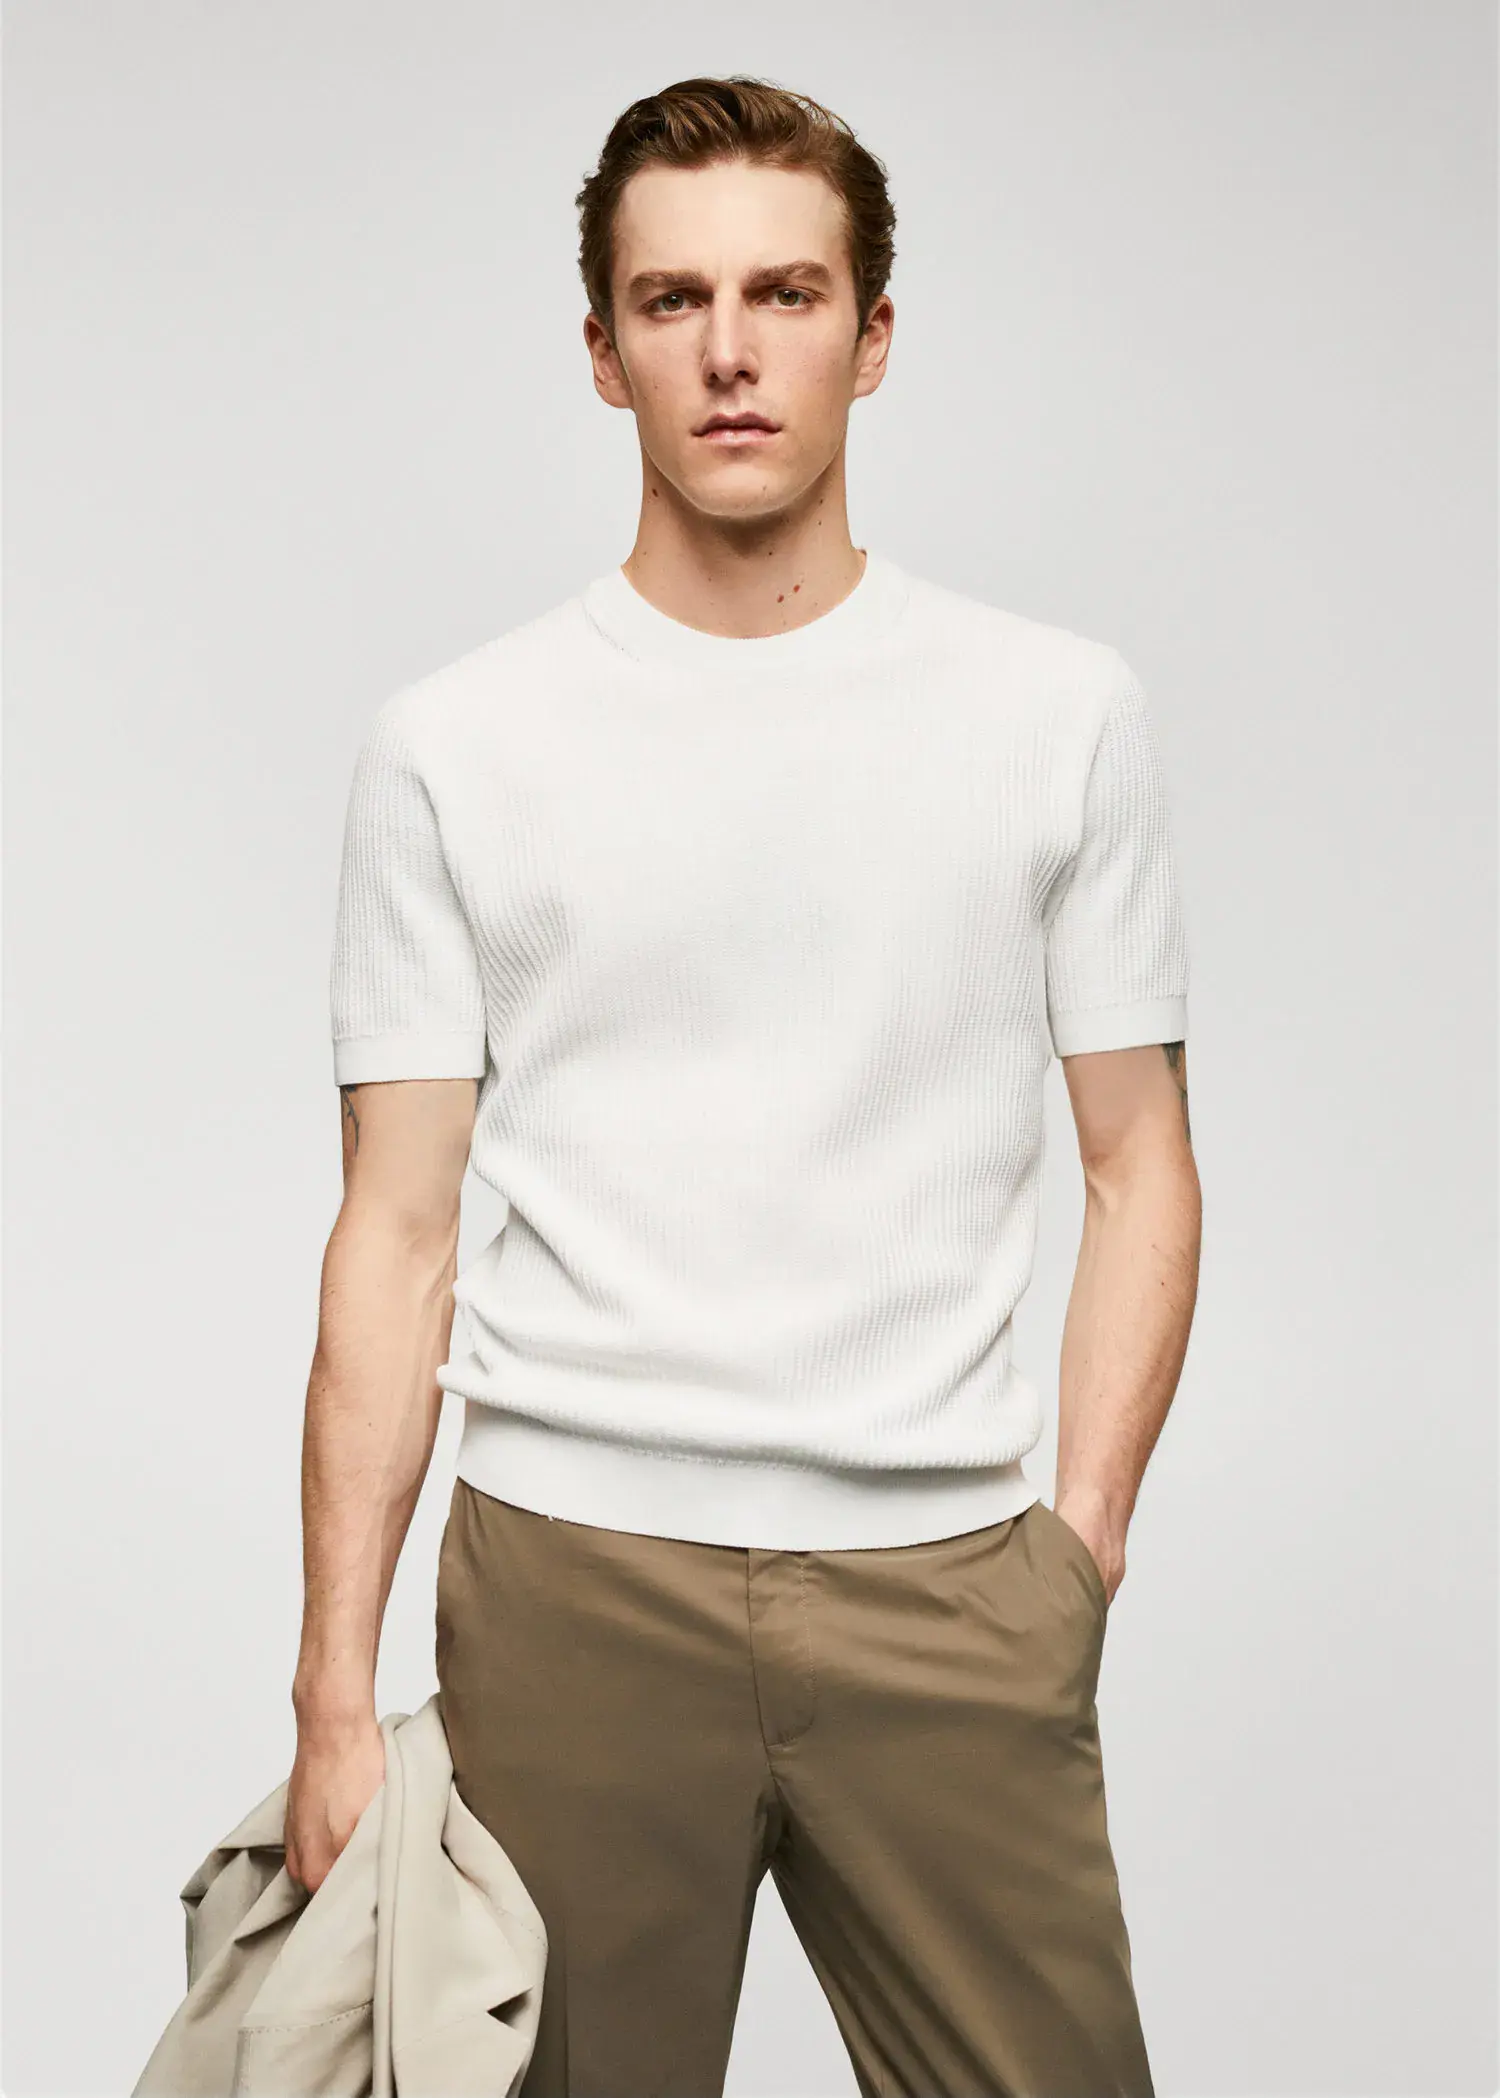 Mango 100% cotton t-shirt with ribbed structure. a man wearing a white shirt and brown shorts. 